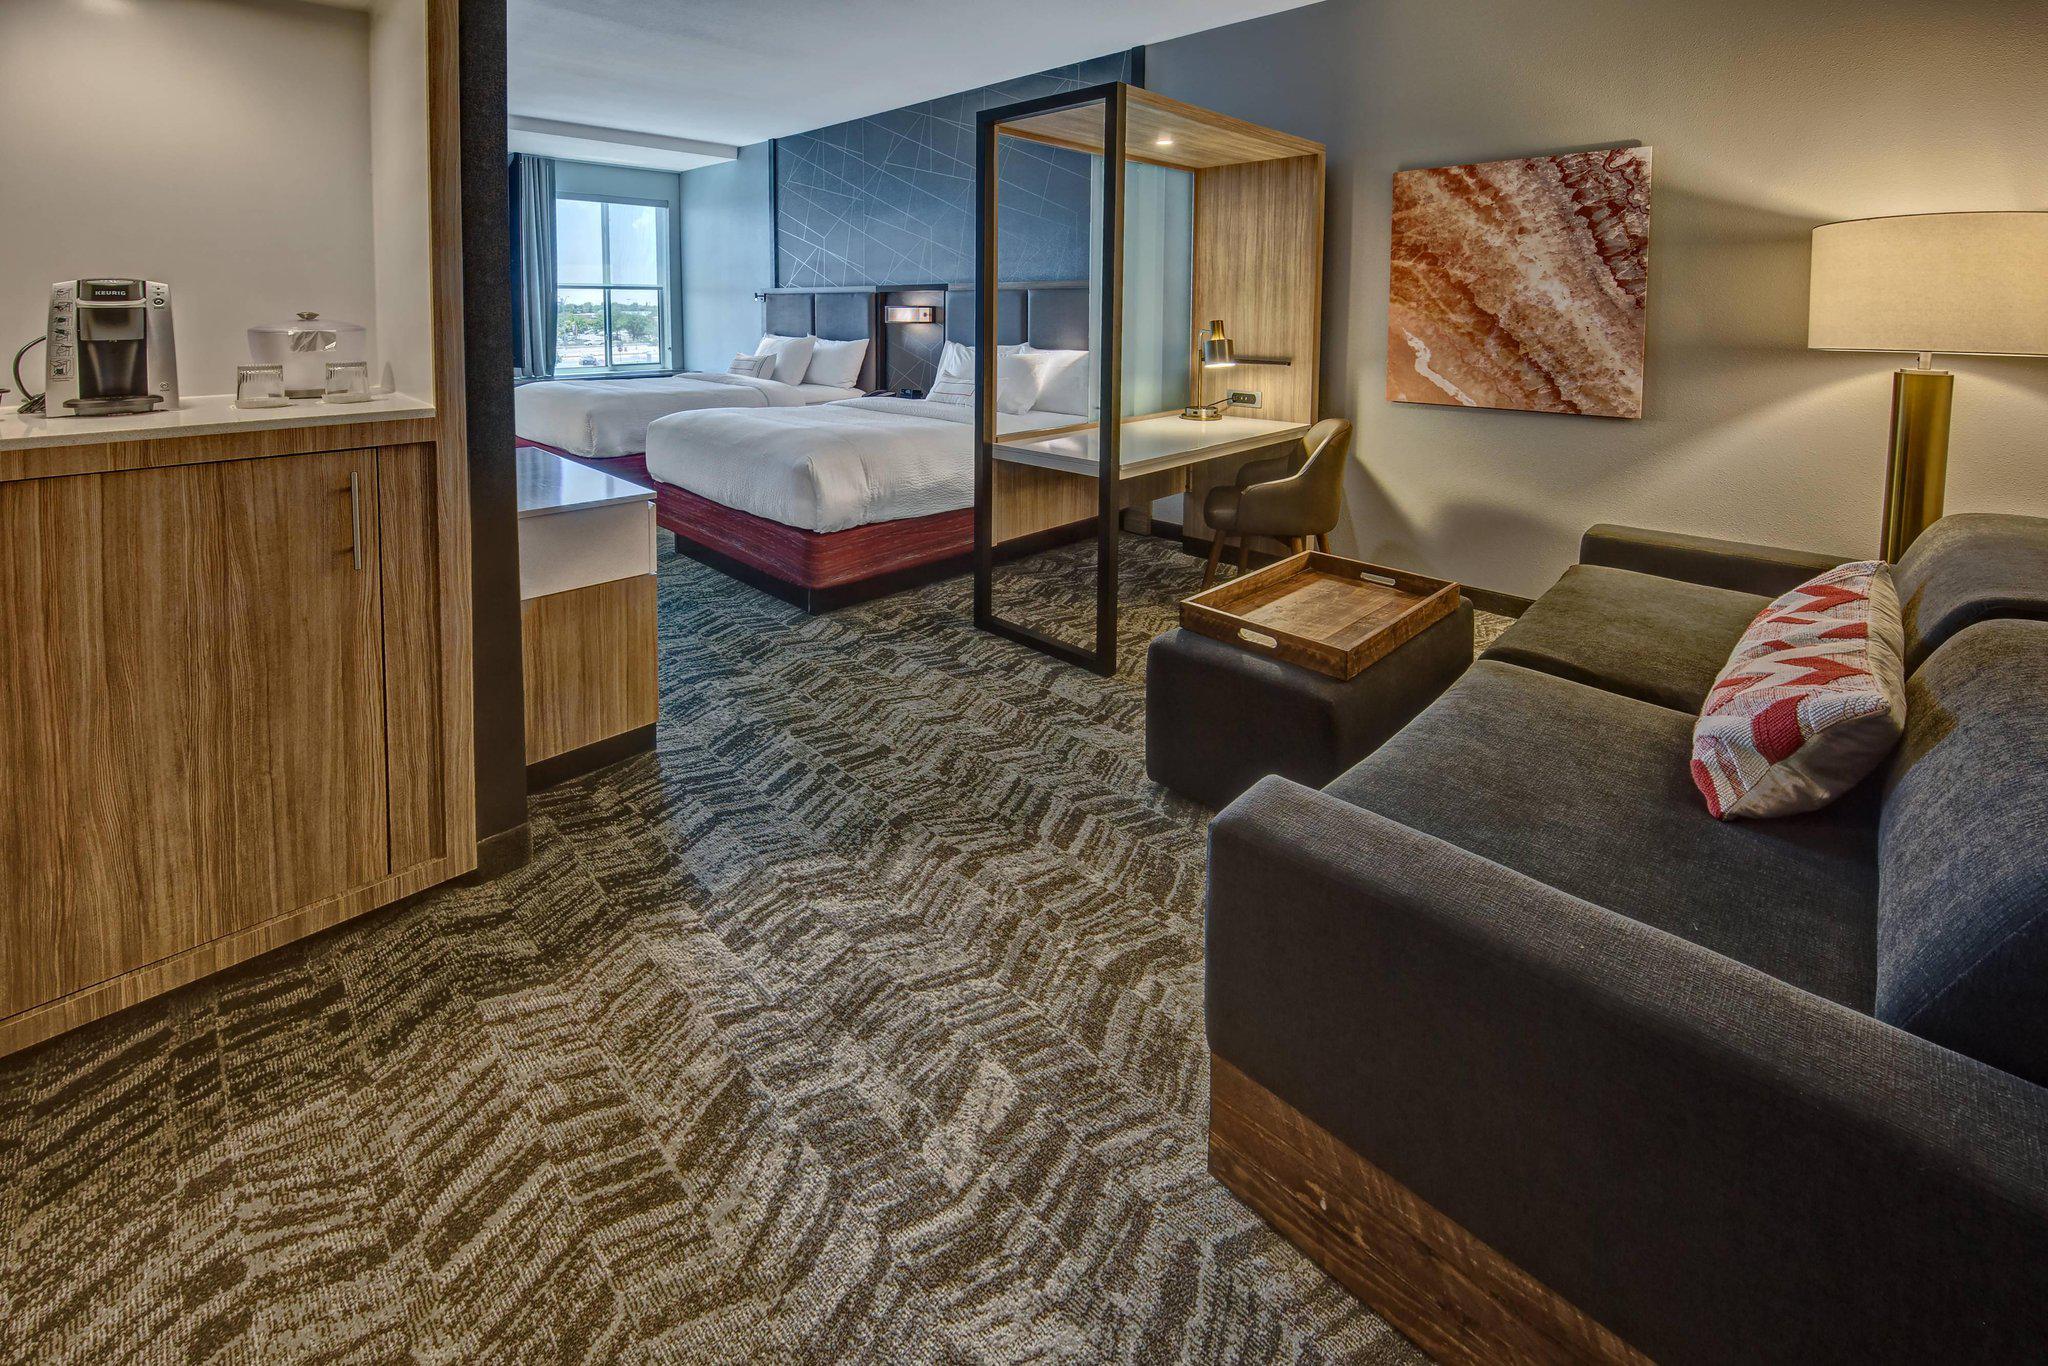 SpringHill Suites by Marriott Amarillo Photo